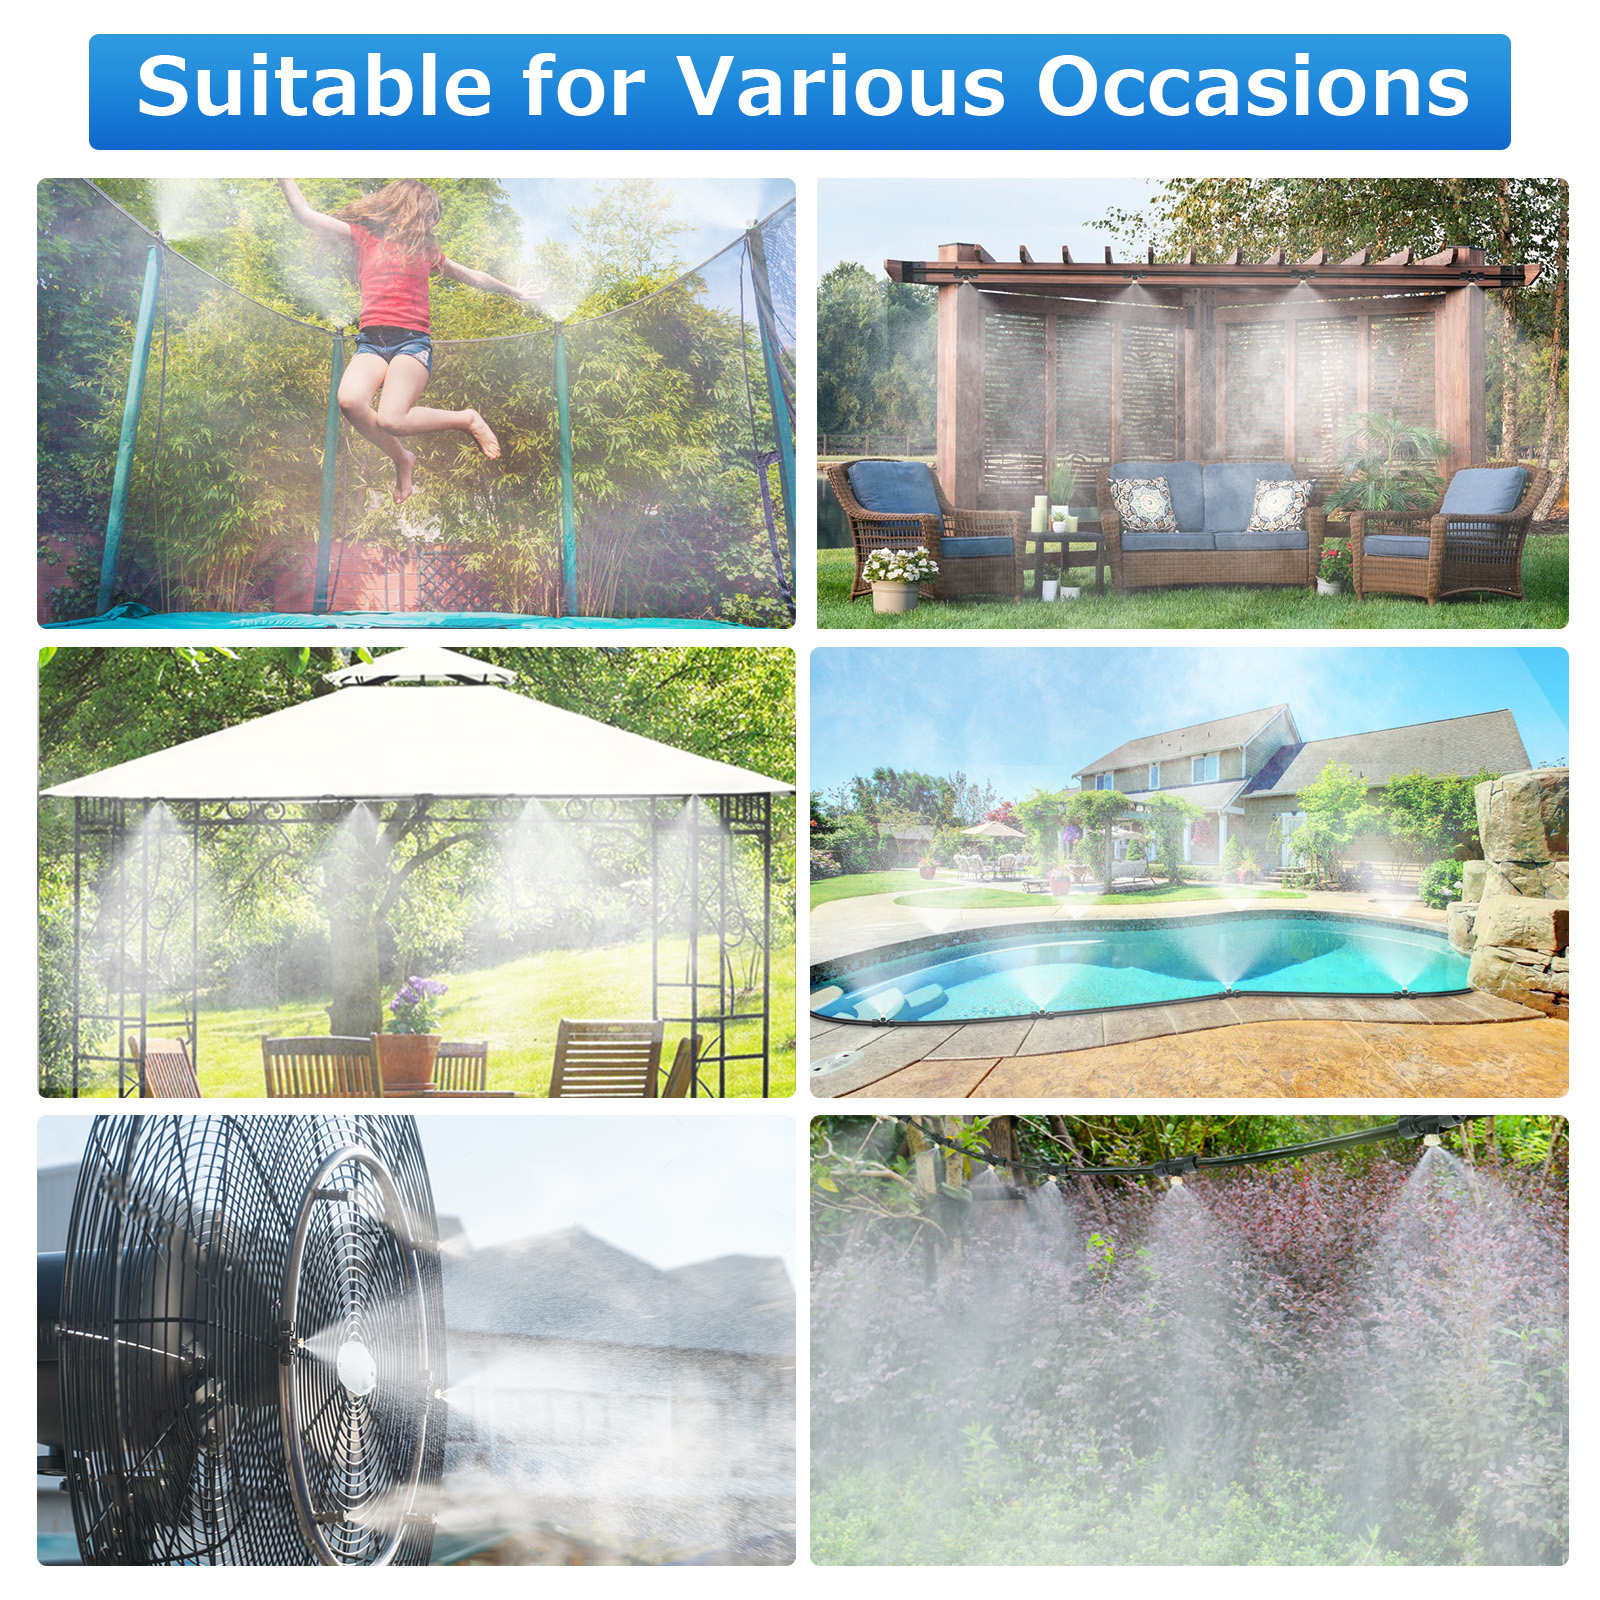 44PCS 15FT Misting Cooling System PE Spray Water Systemfor Garden Landscaping Greenhouse